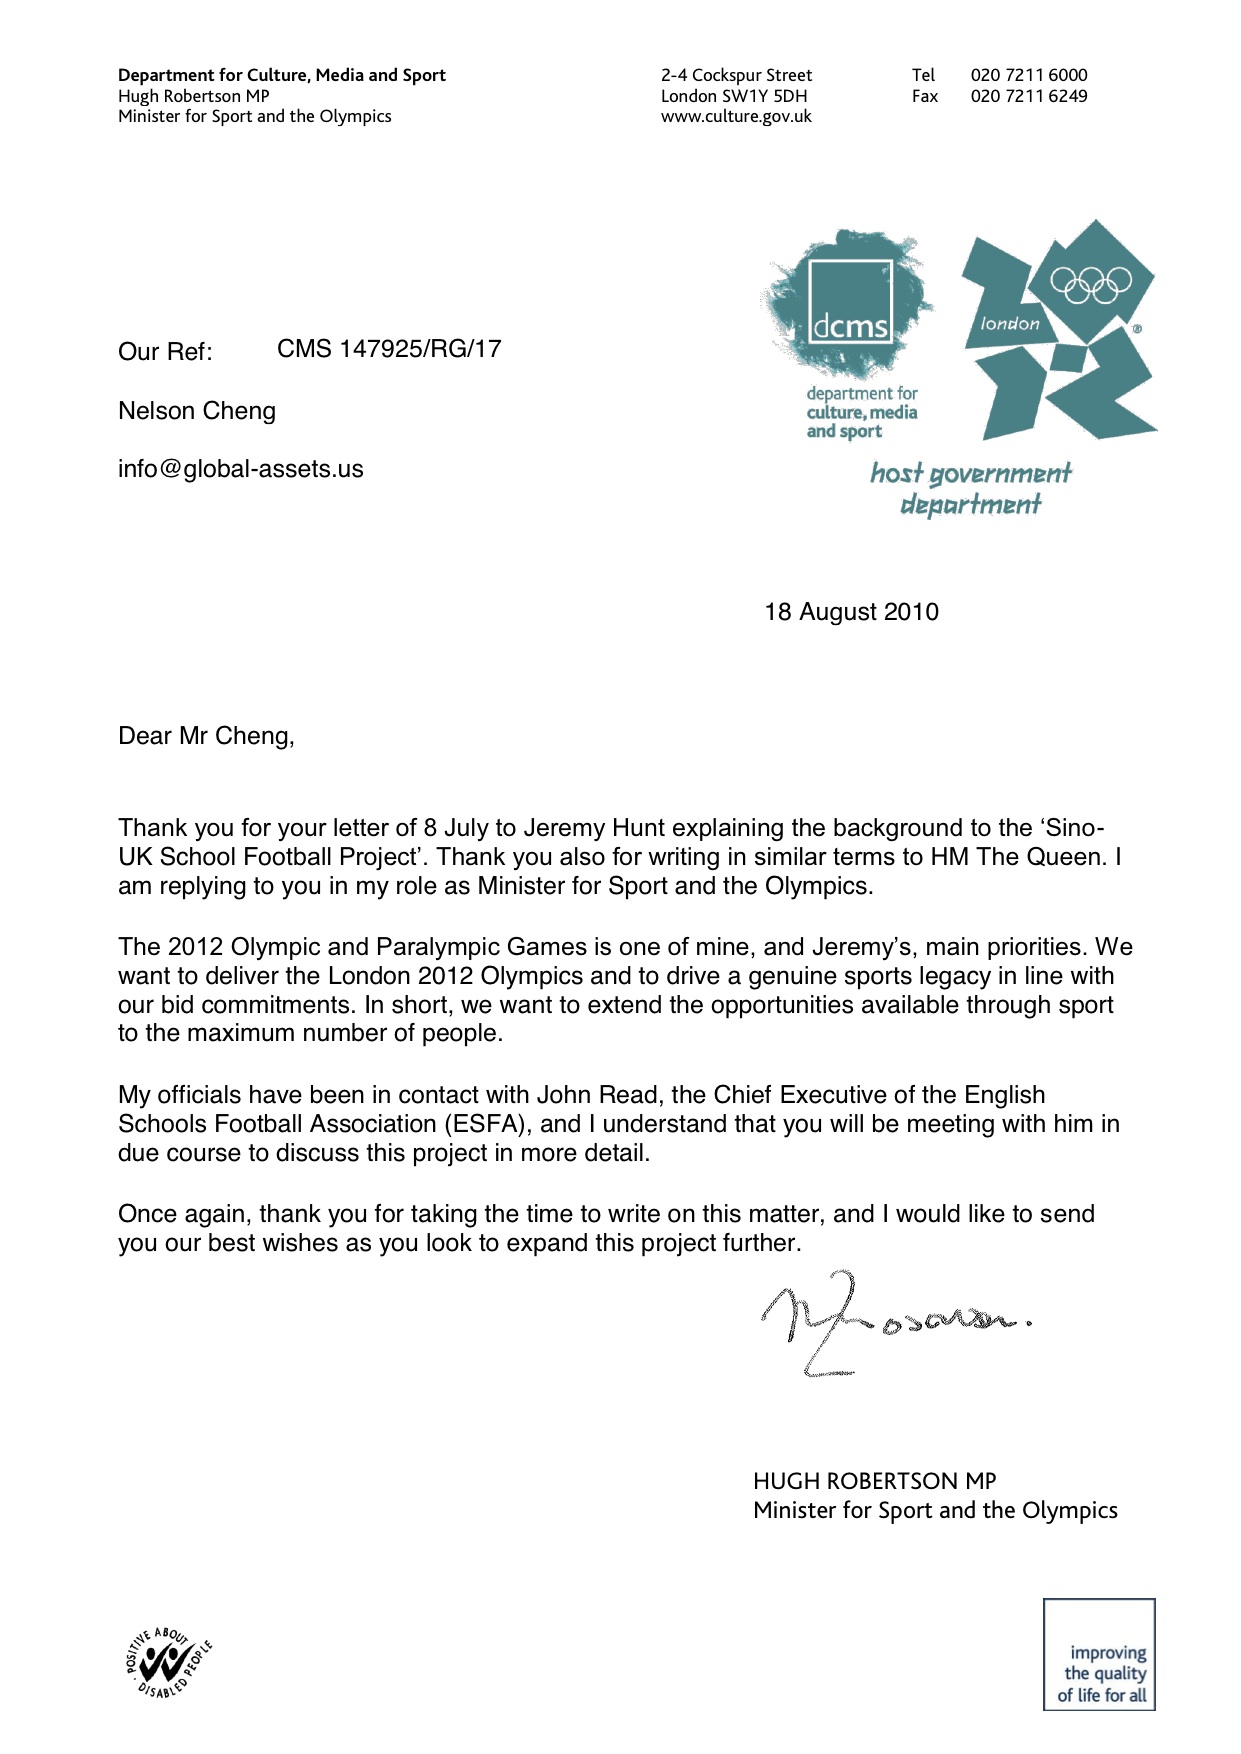 Reply-from-Minister-for-Sport-and-the-Olympics